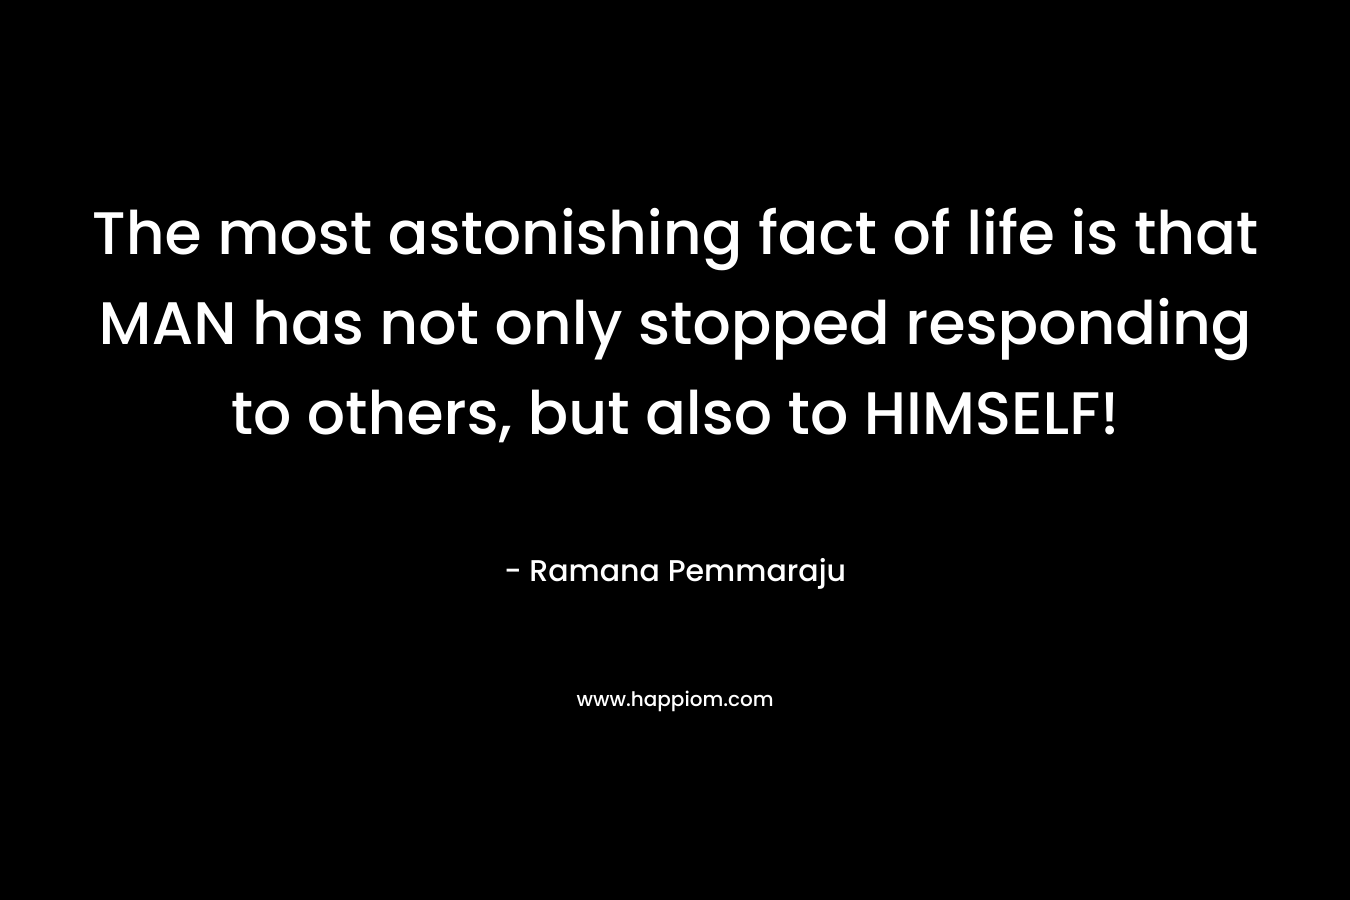 The most astonishing fact of life is that MAN has not only stopped responding to others, but also to HIMSELF!